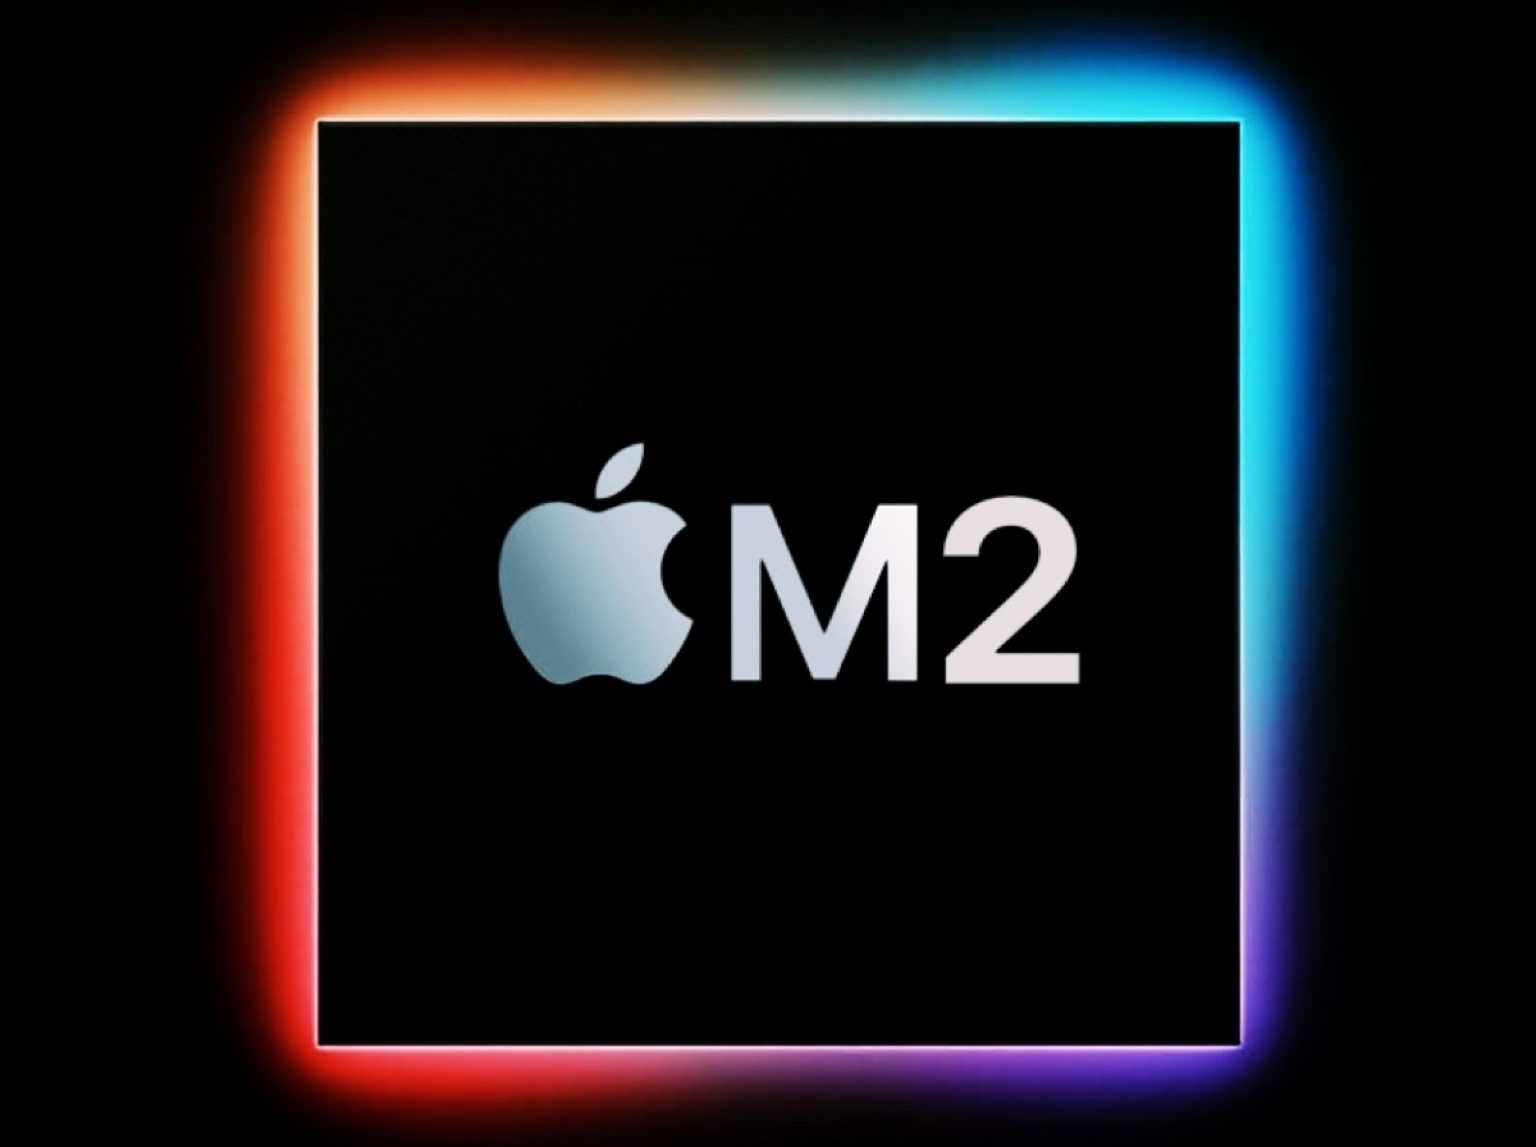 apple m2 chip into mass production